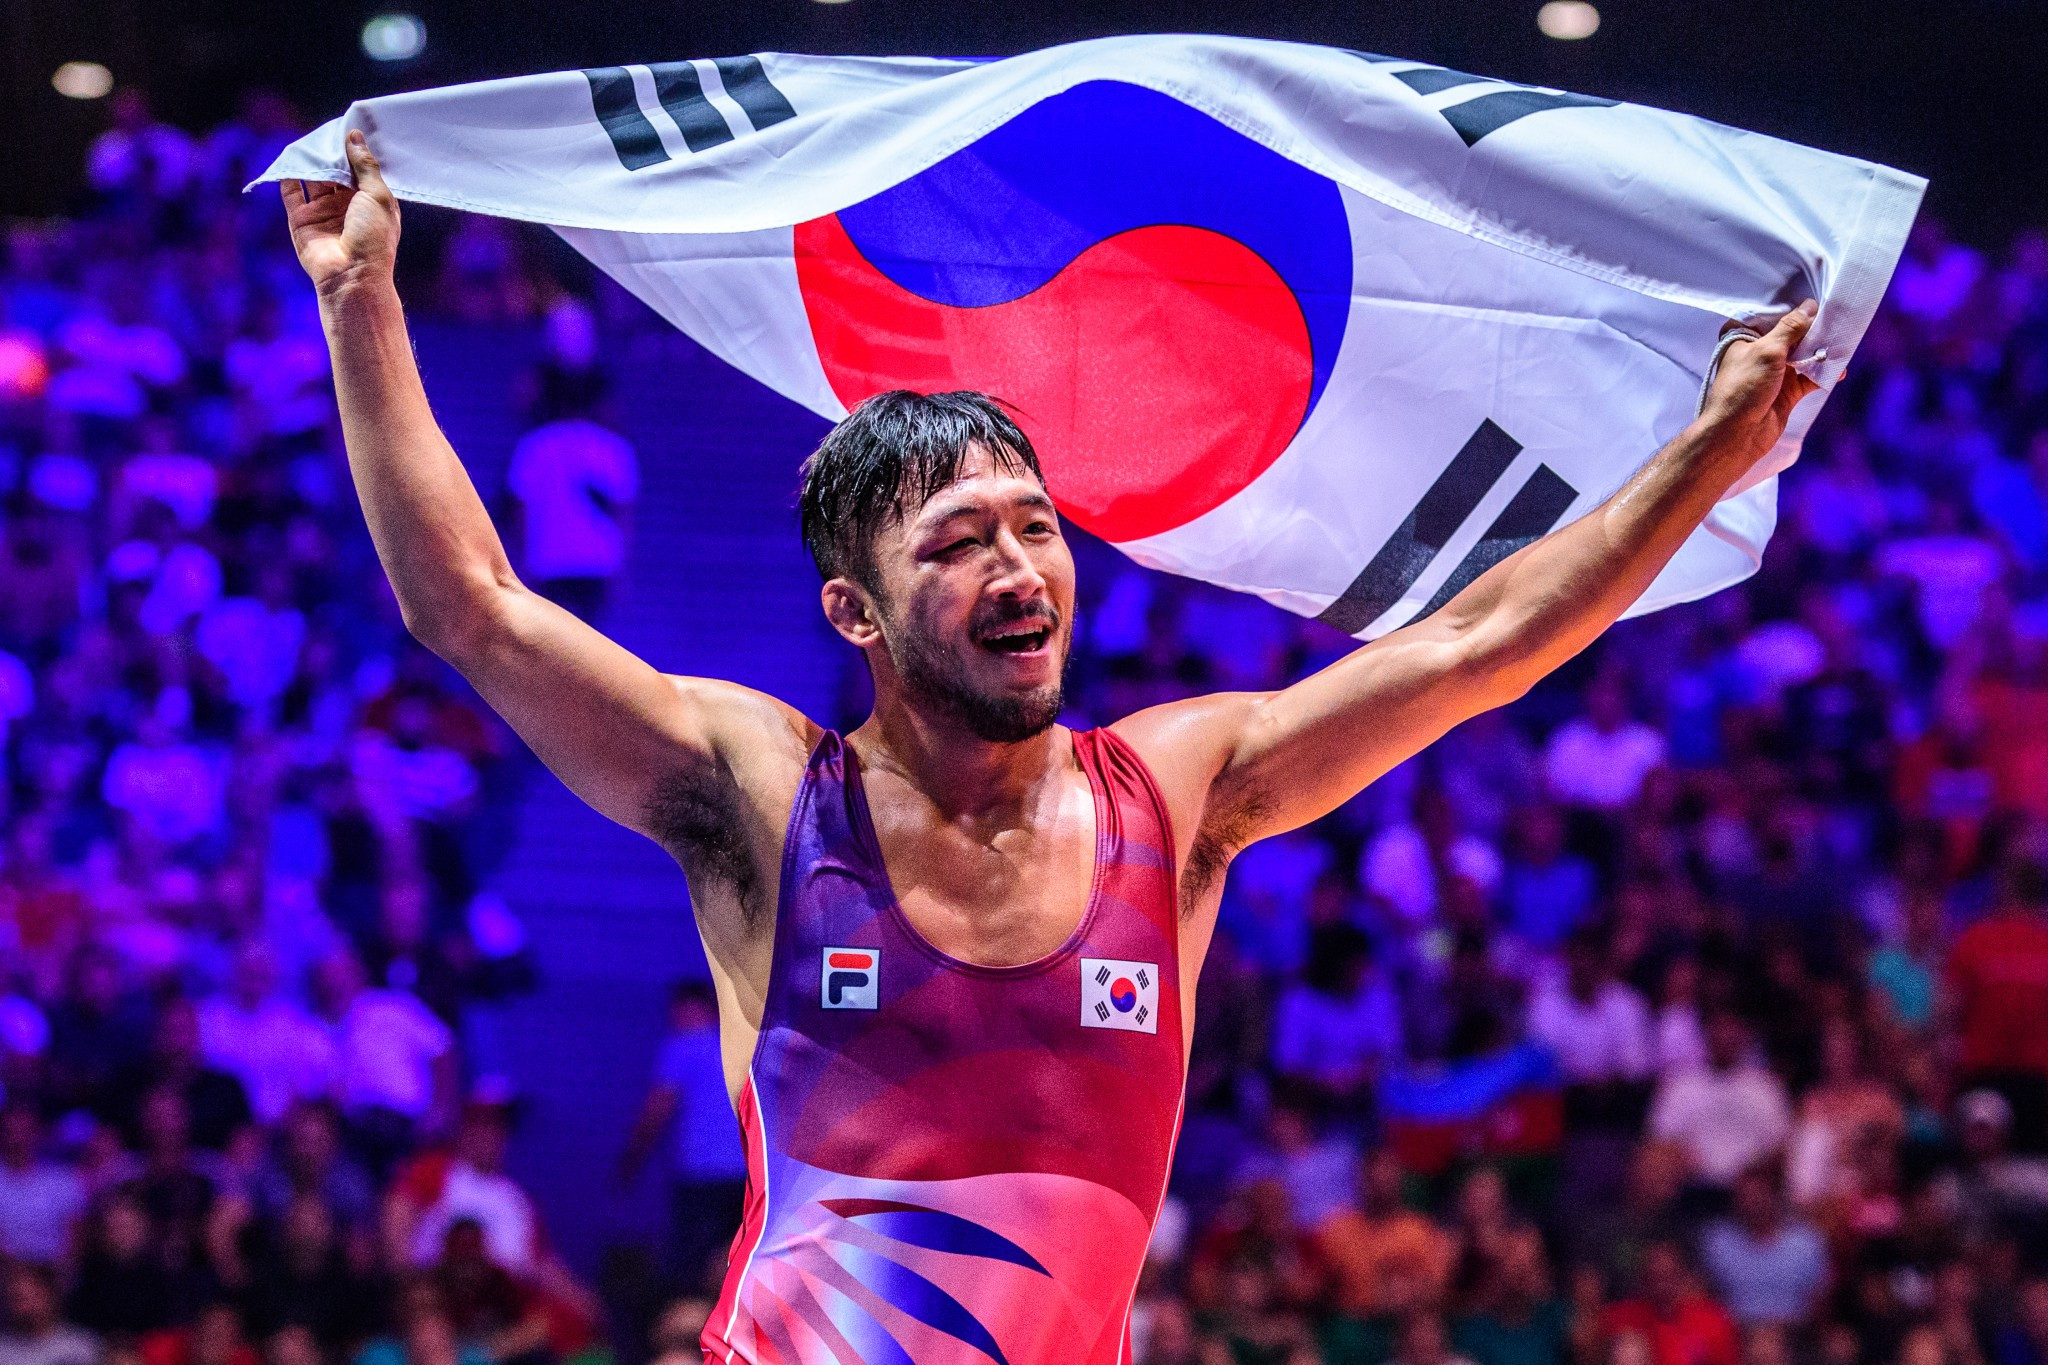 Ryu was in fine form as he returned to the top of the World Championships podium after a four-year hiatus ©UWW